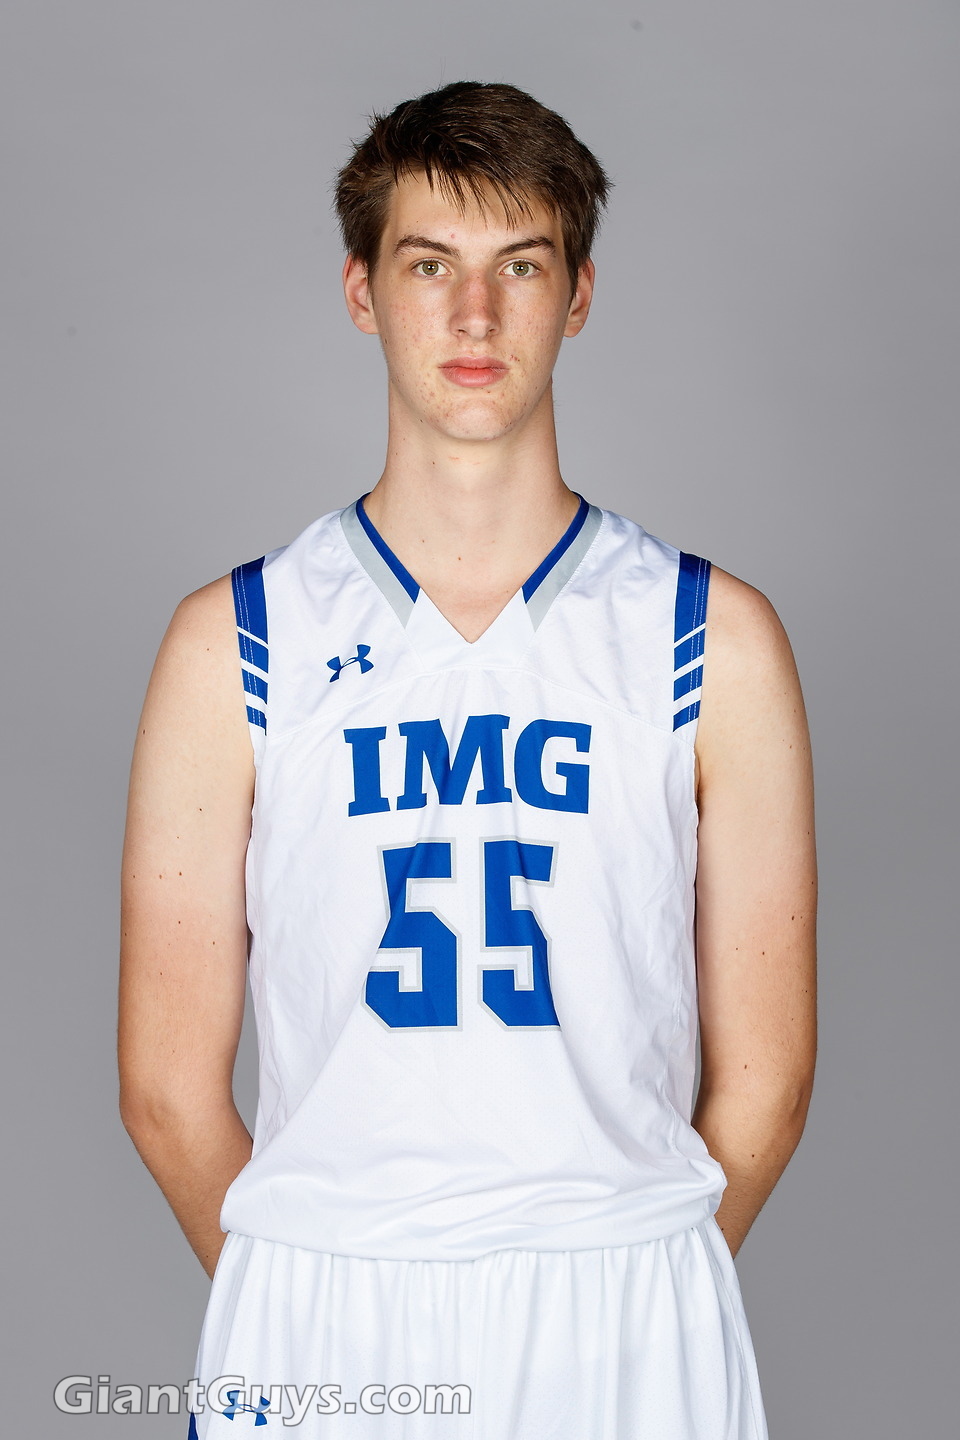 Olivier Rioux 7 foot 8 basketball IMG Academy